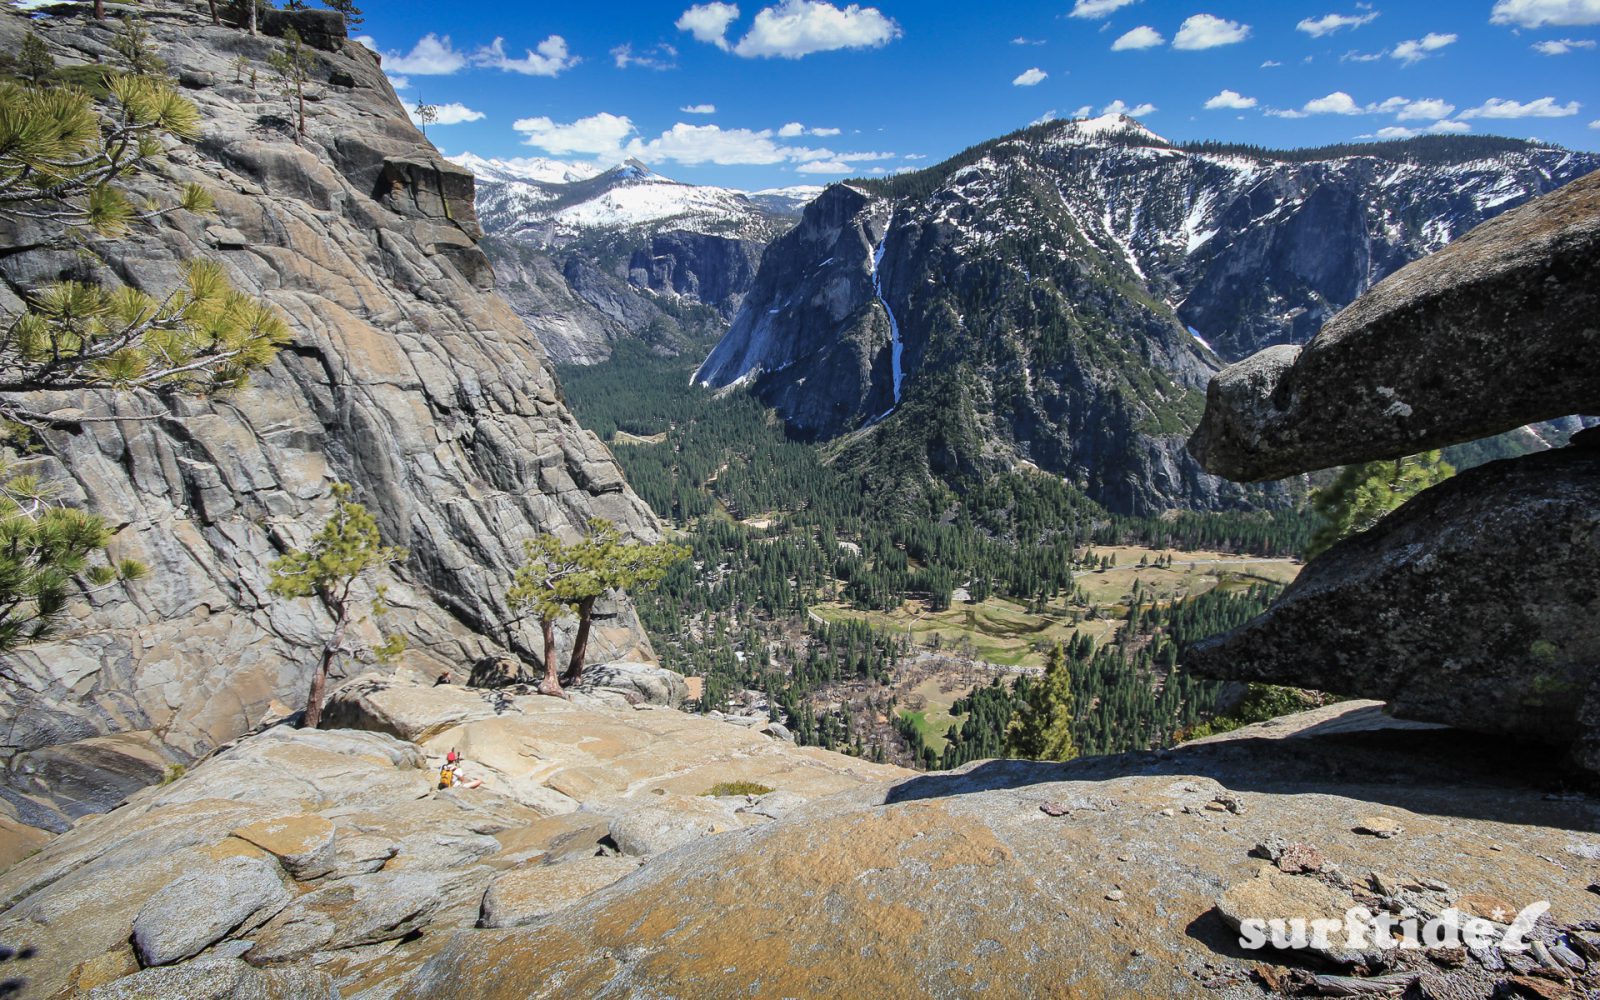 The view on a sunny day in spring across the valley from Yosemite Point in Yosemite National Park, USA